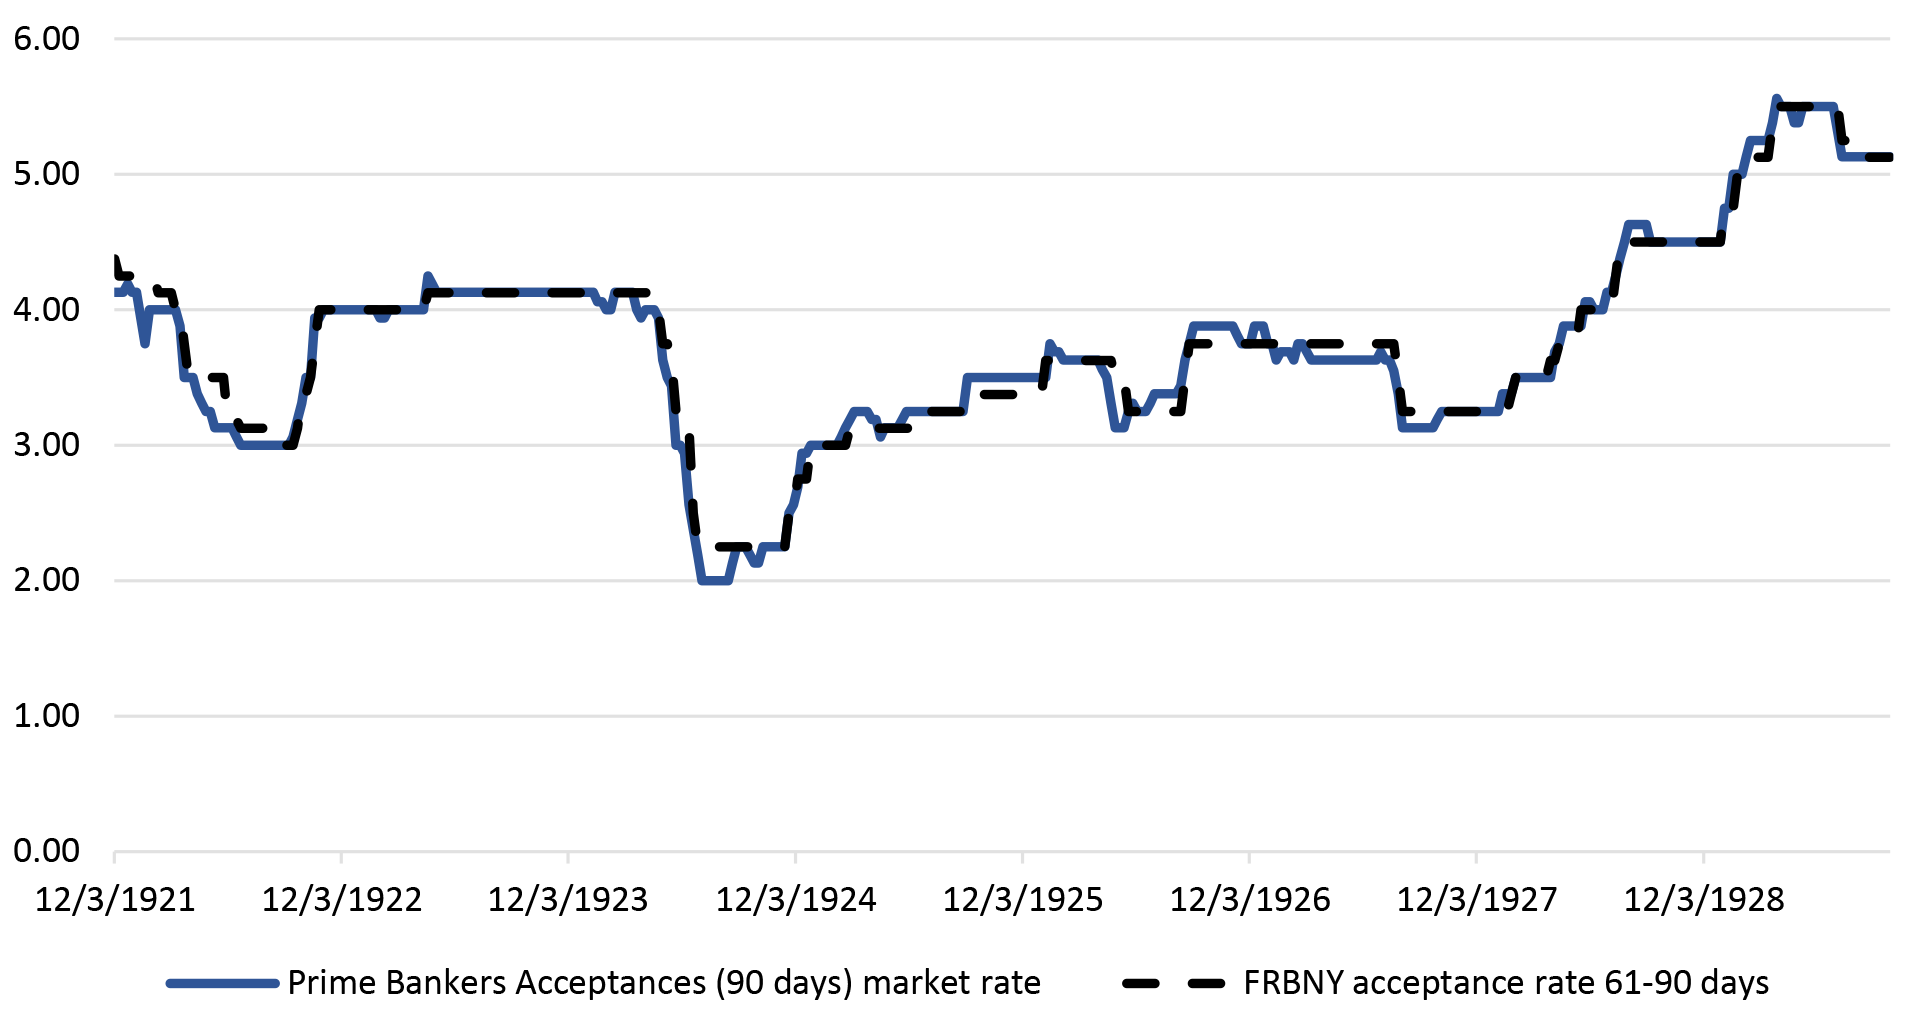 Figure 1: Market rate of interest and FRBNY buying rate on bankers' acceptances. See accessible link for data.